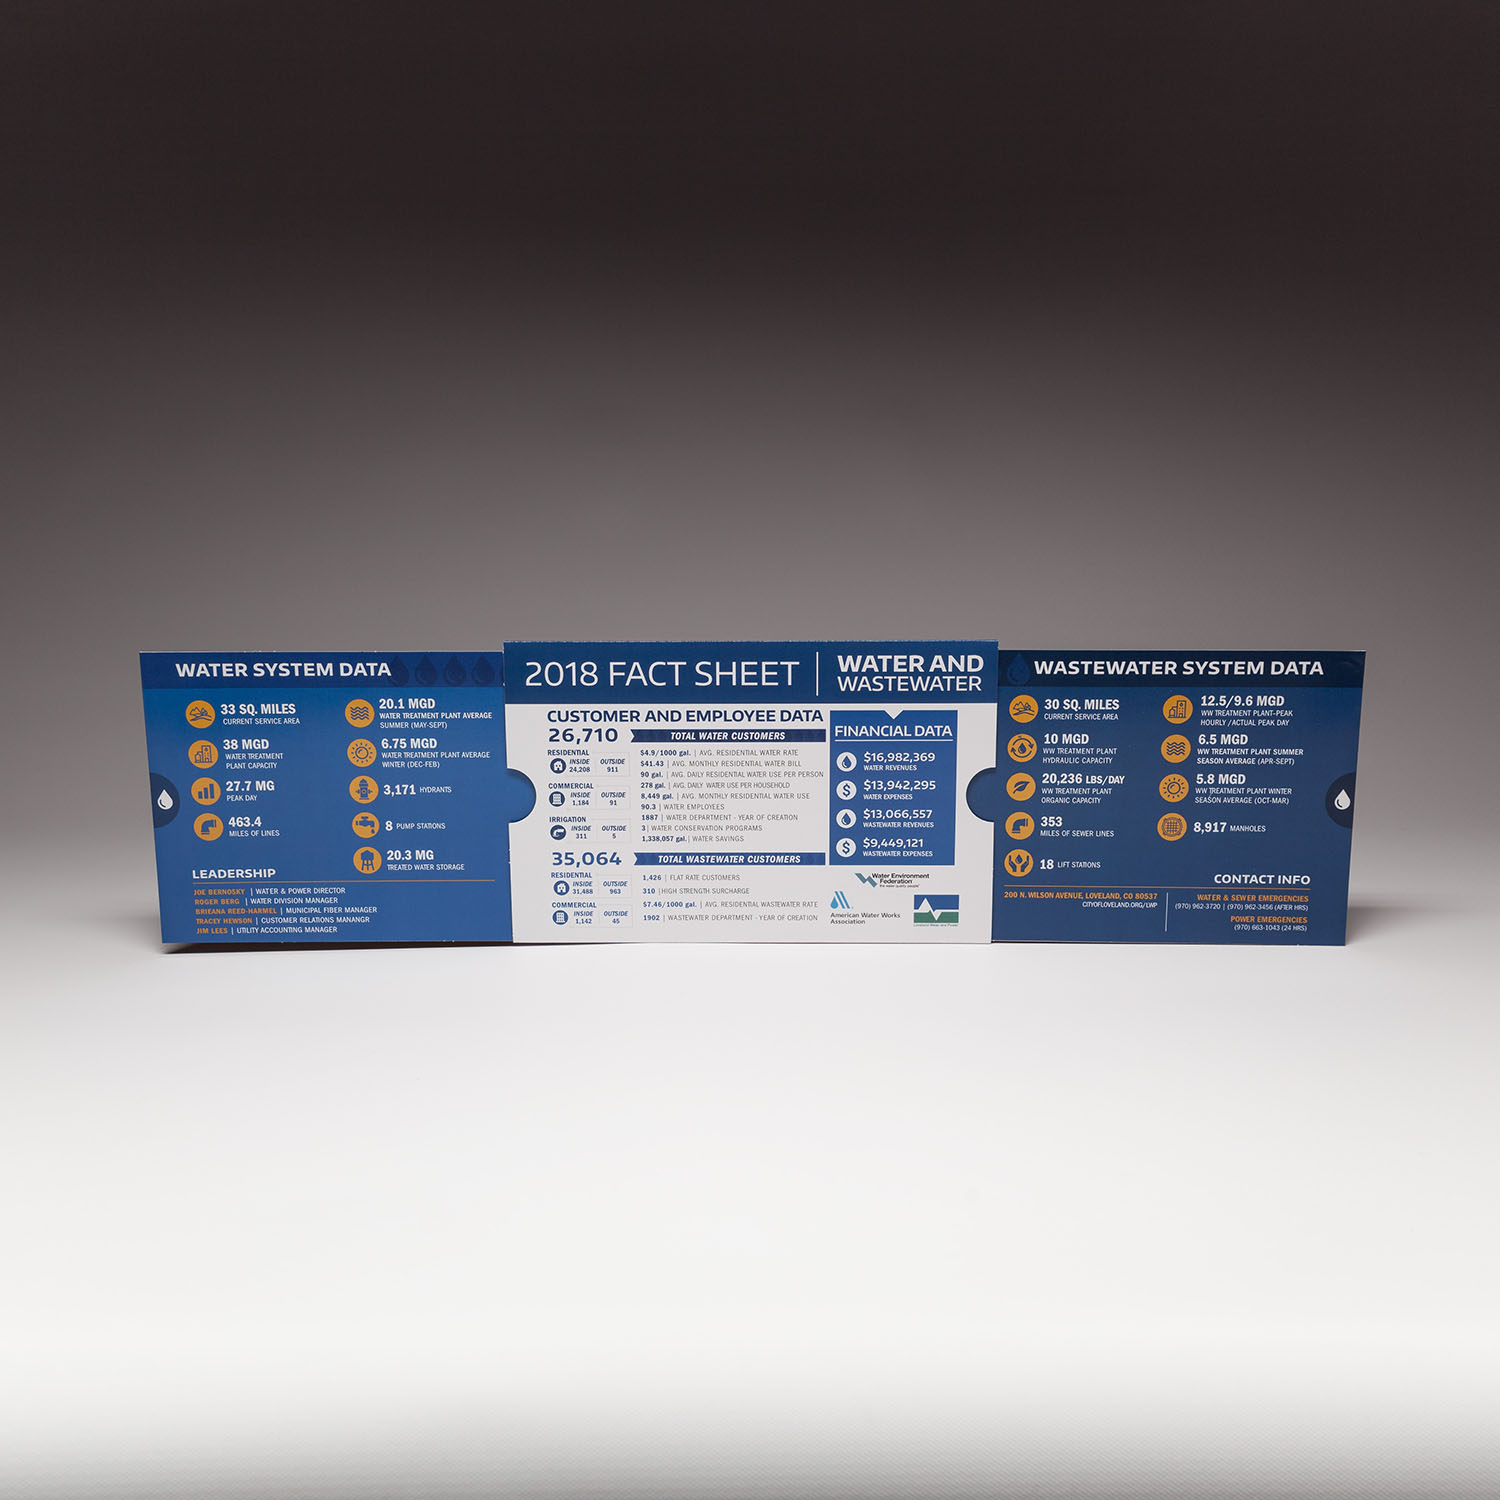 Our large extendo is an easy way to display a large amount of information in a very engaging way